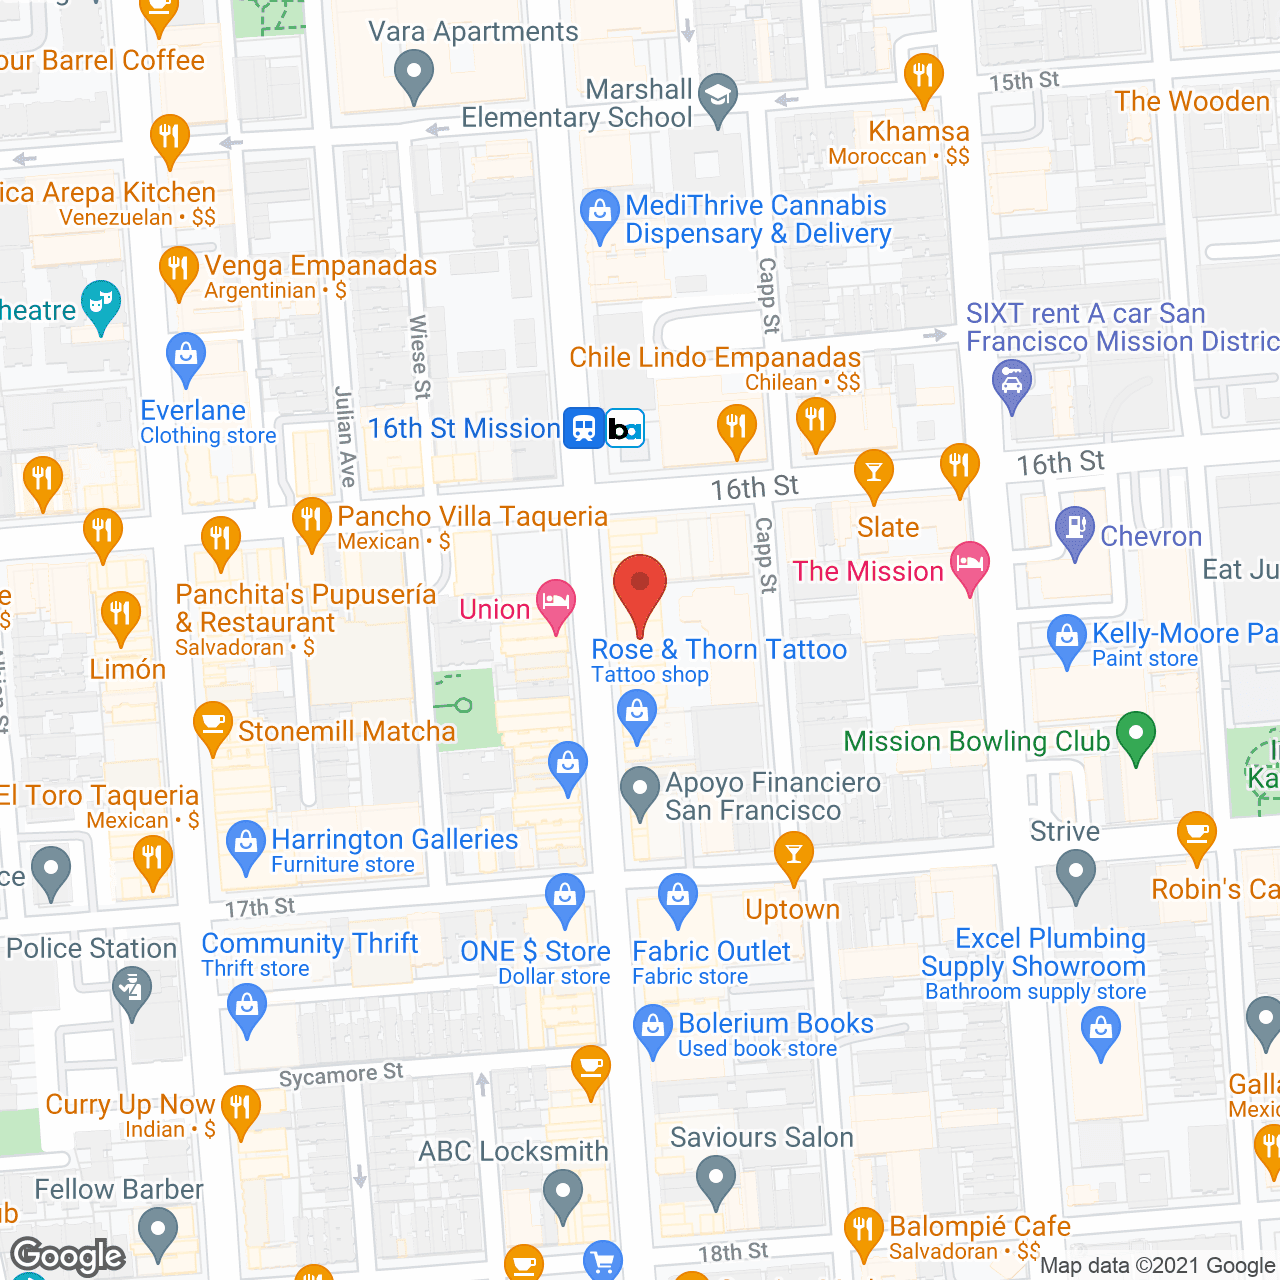 Mission Plaza Apartments in google map